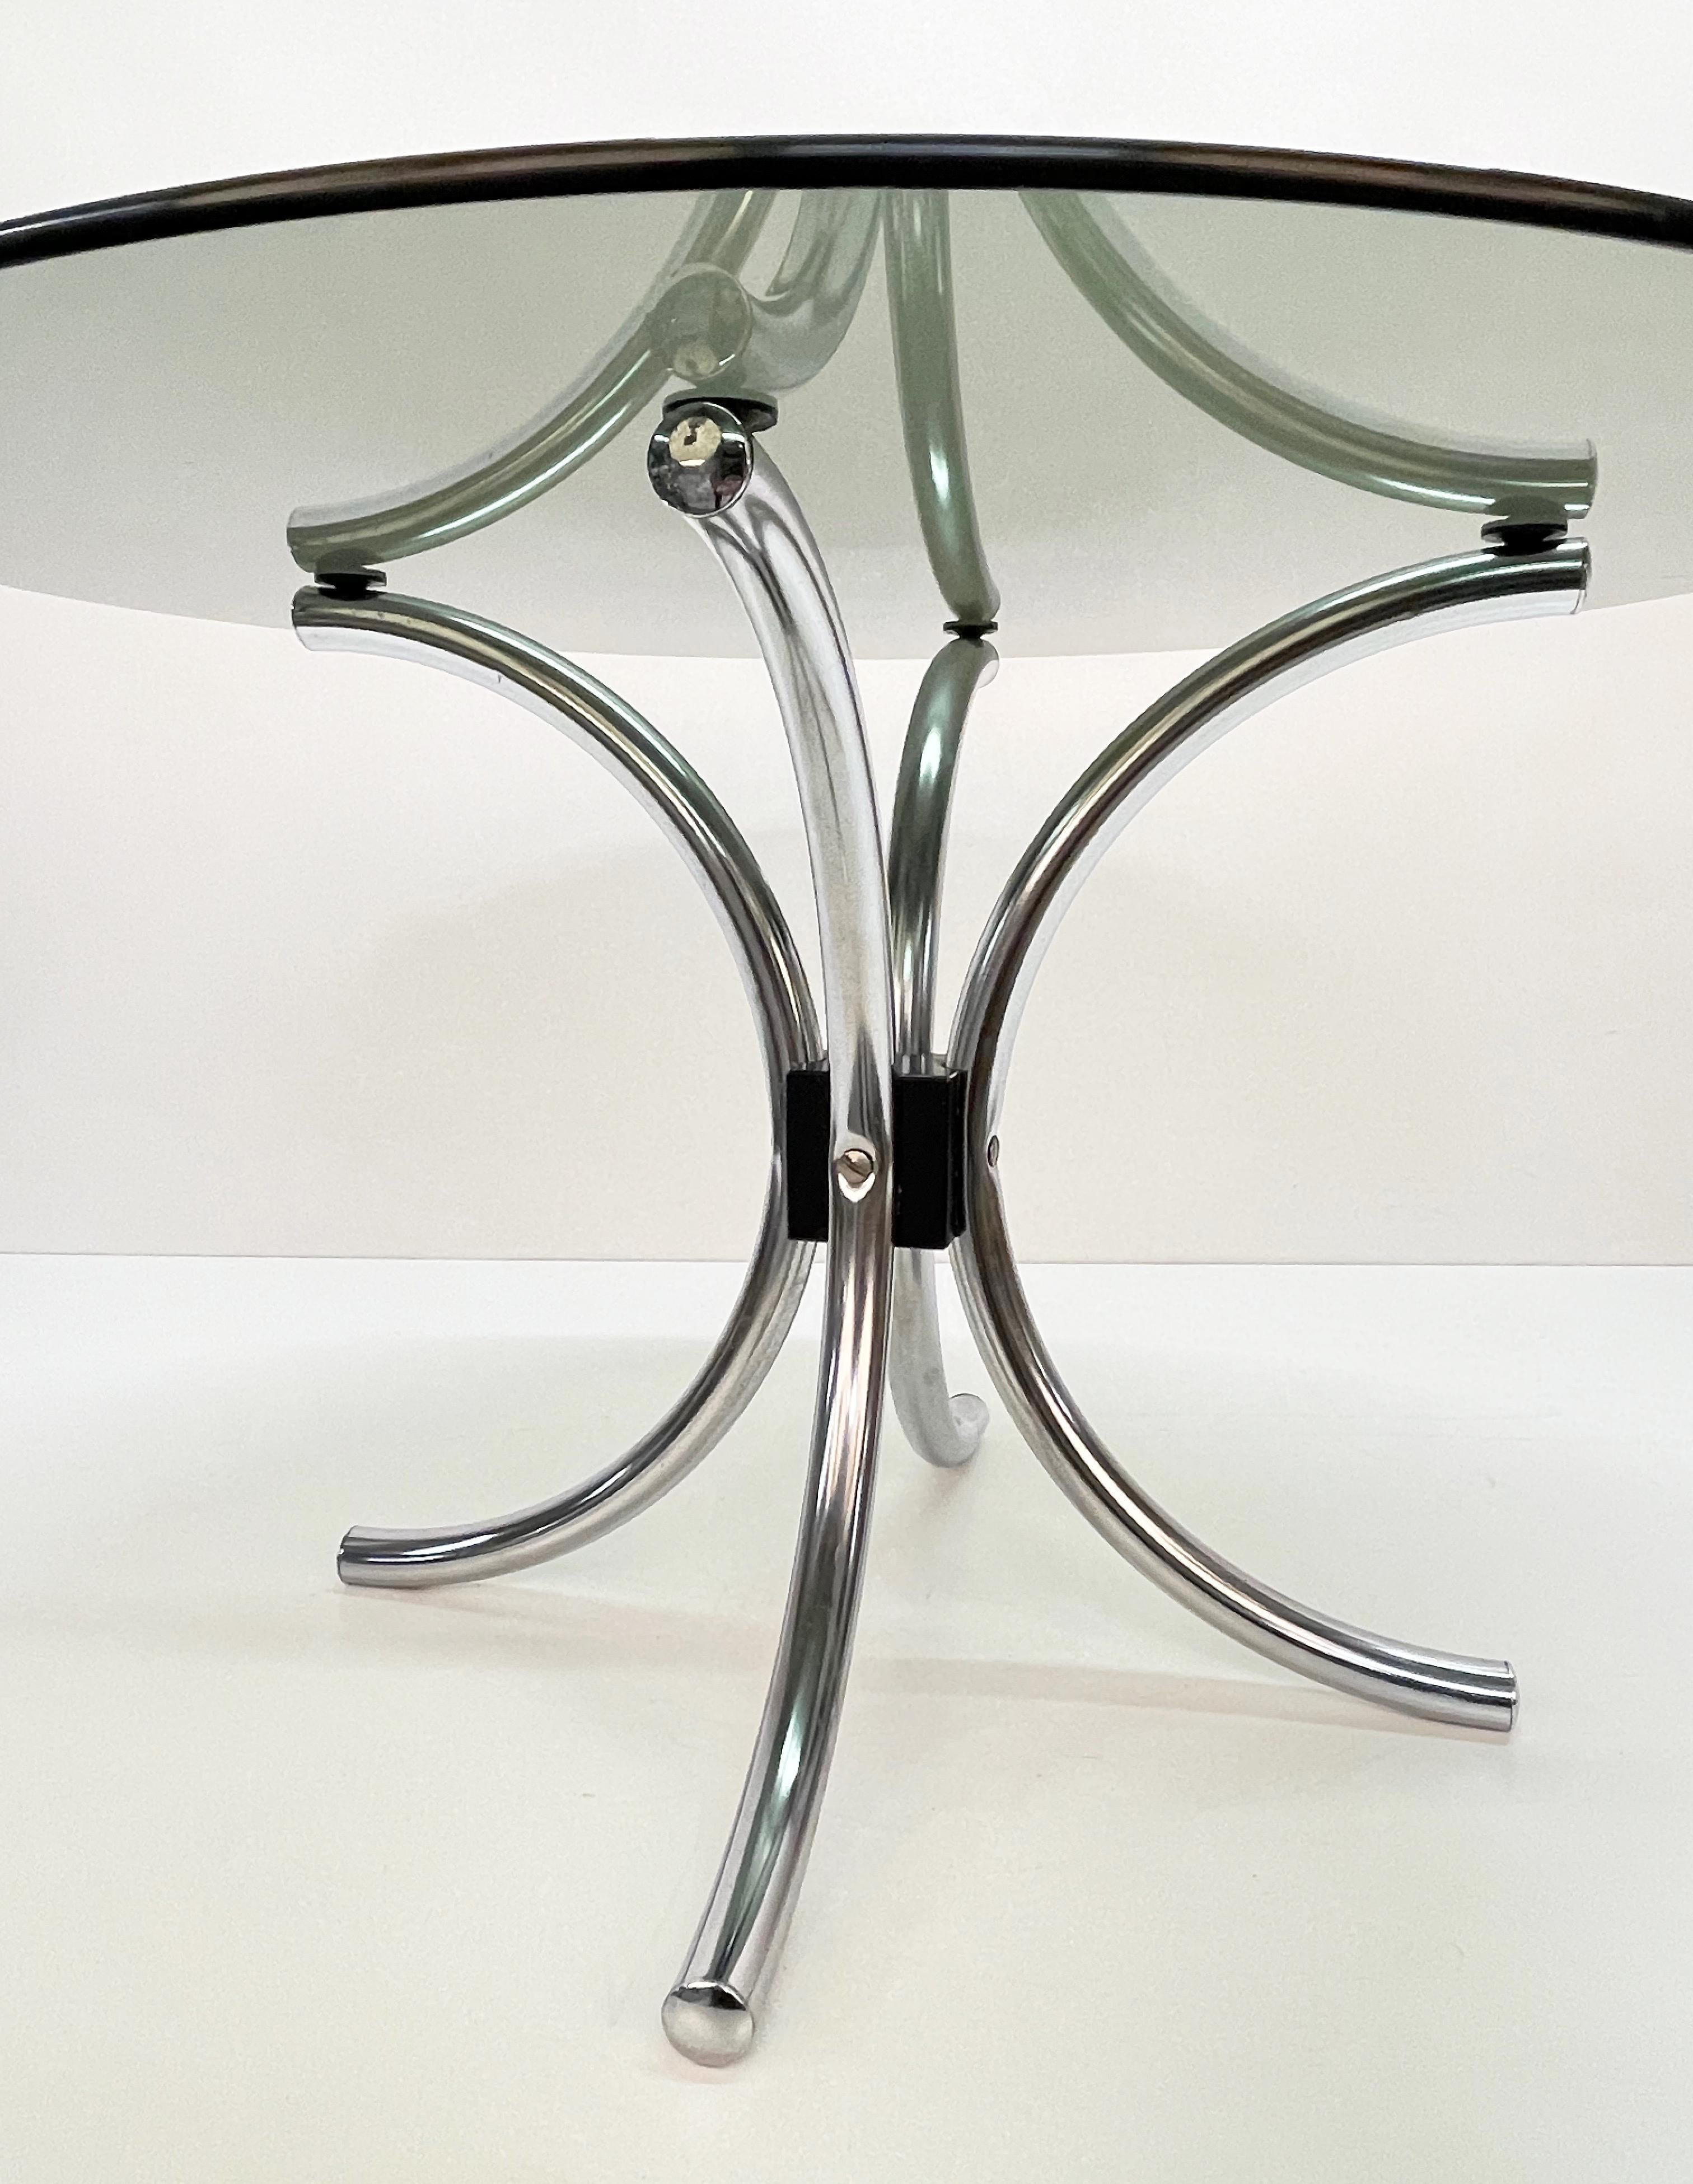 Midcentury Chromed Steel Italian Coffee Table with Smoked Glass Round Top, 1960s For Sale 1